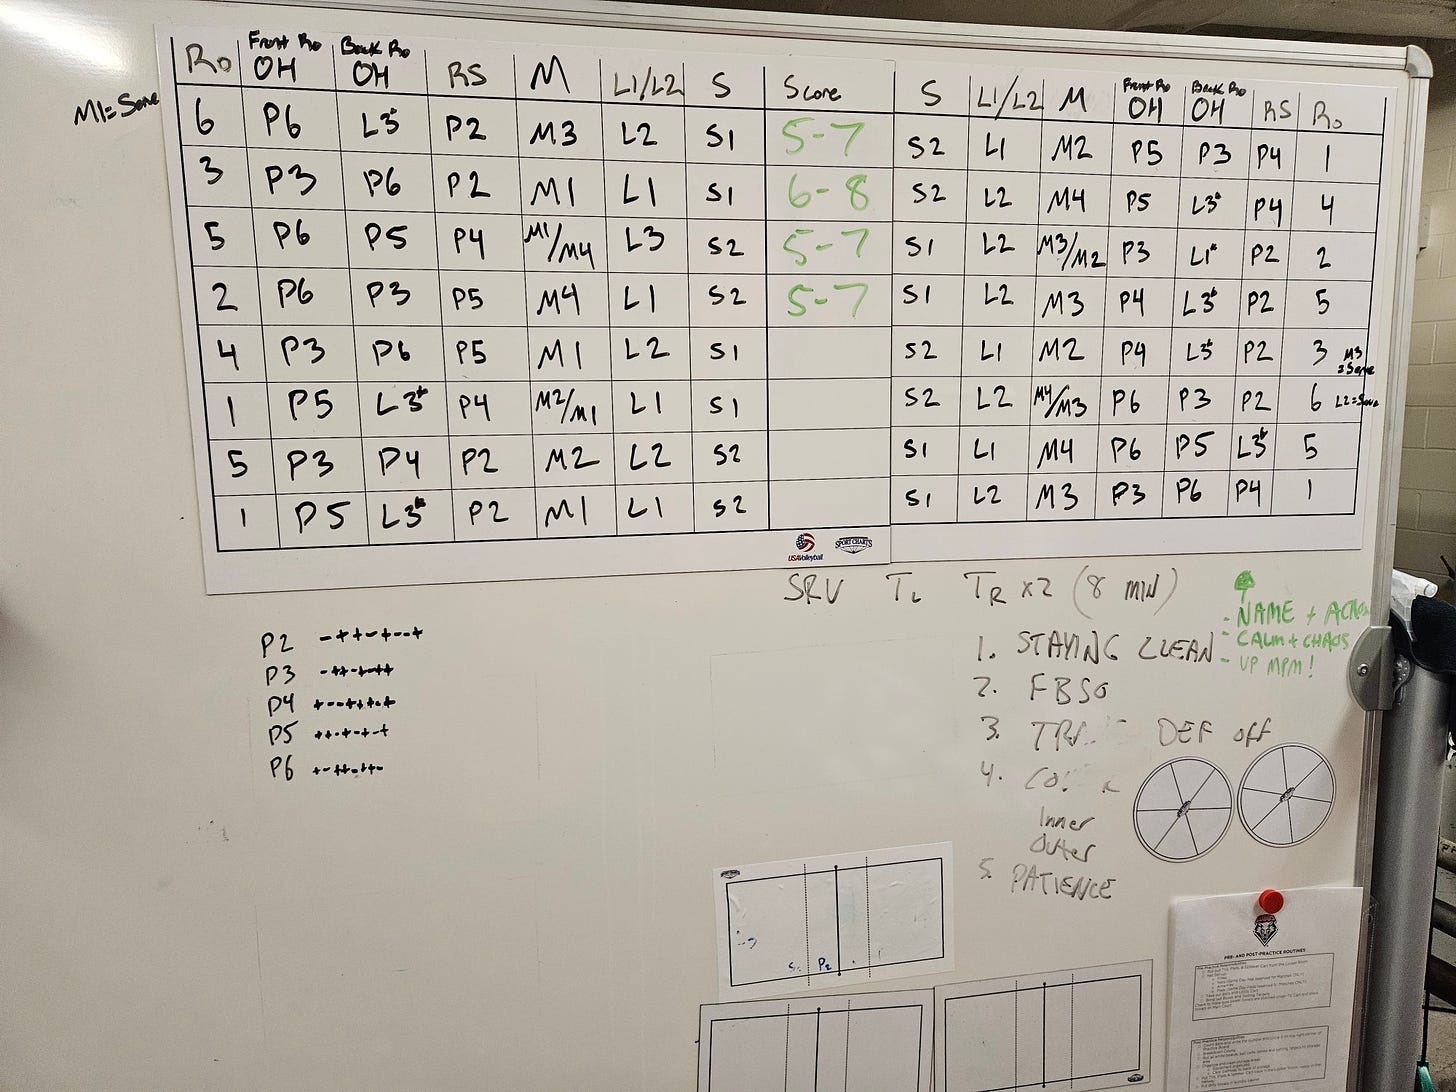 dry erase board with position assignments